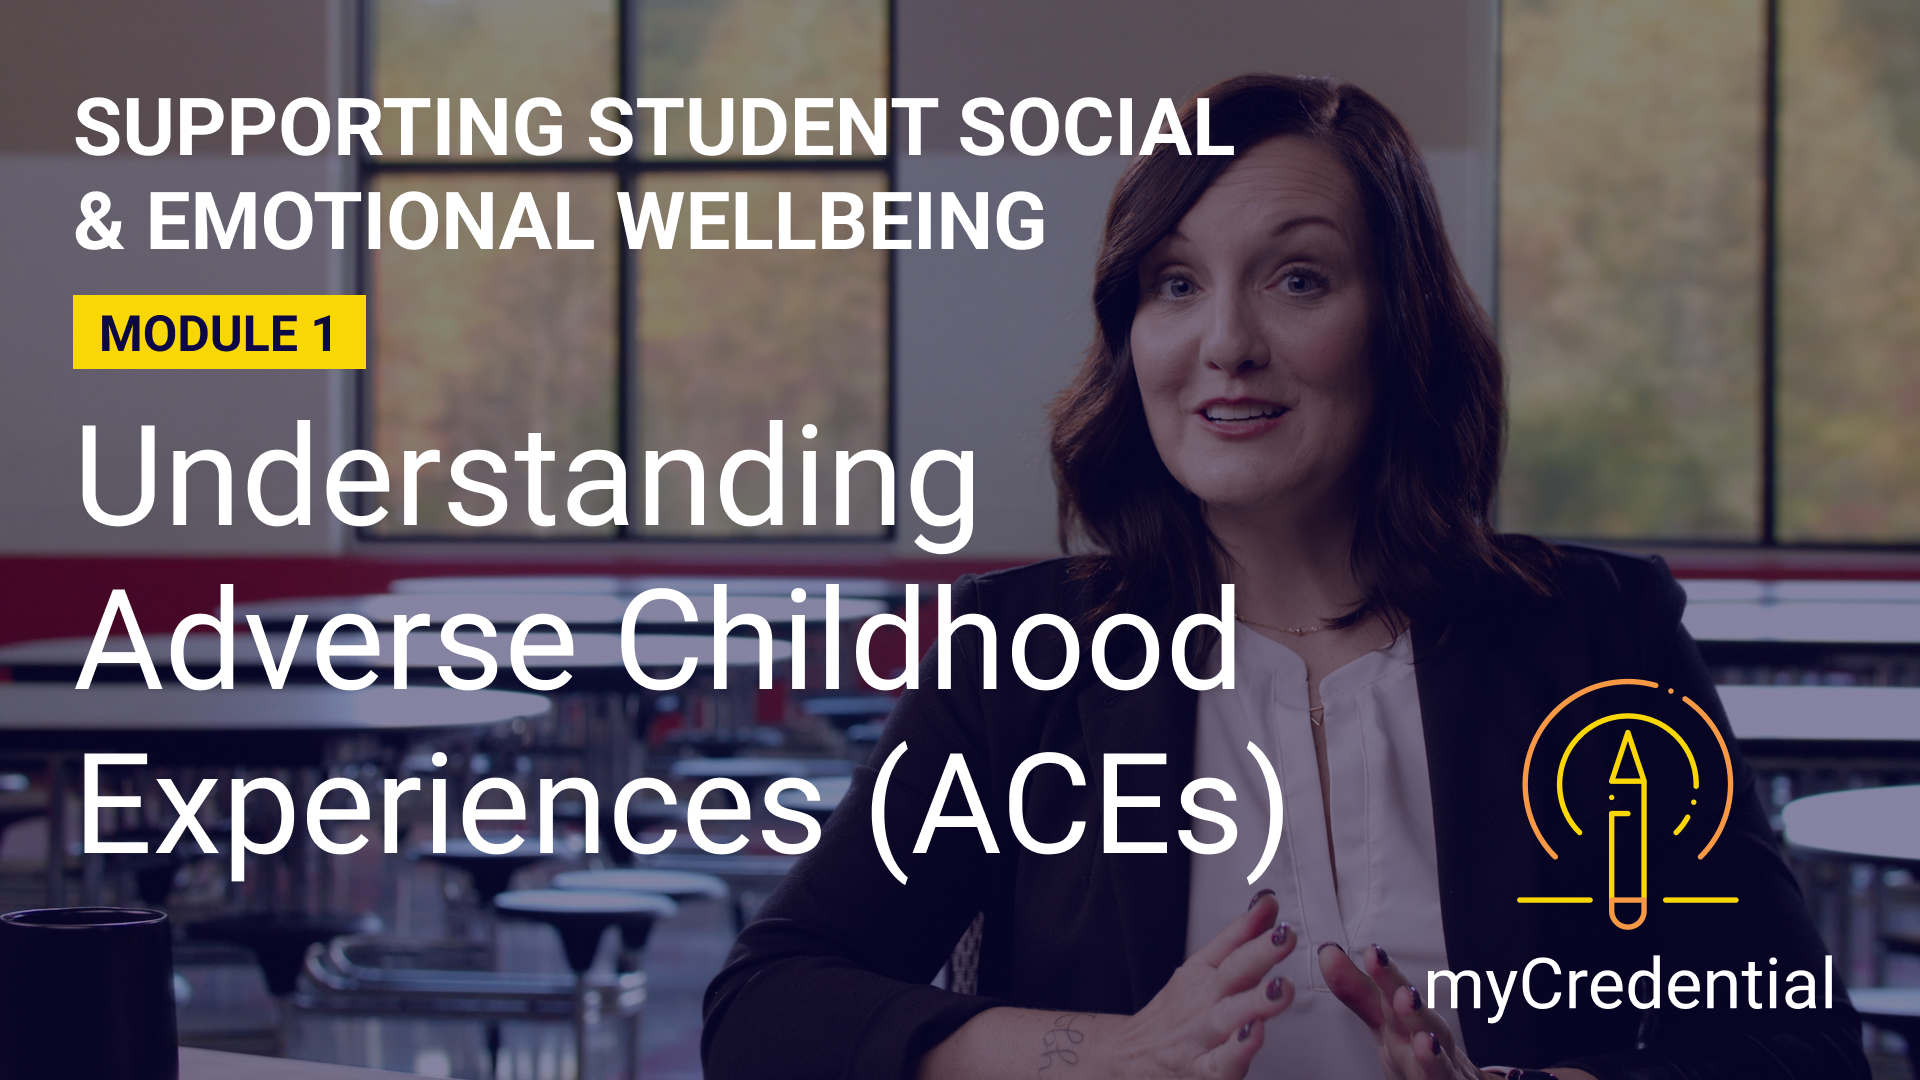 Supporting Student Social & Emotional Wellbeing (Module 1): Adverse Childhood Experiences (ACEs)